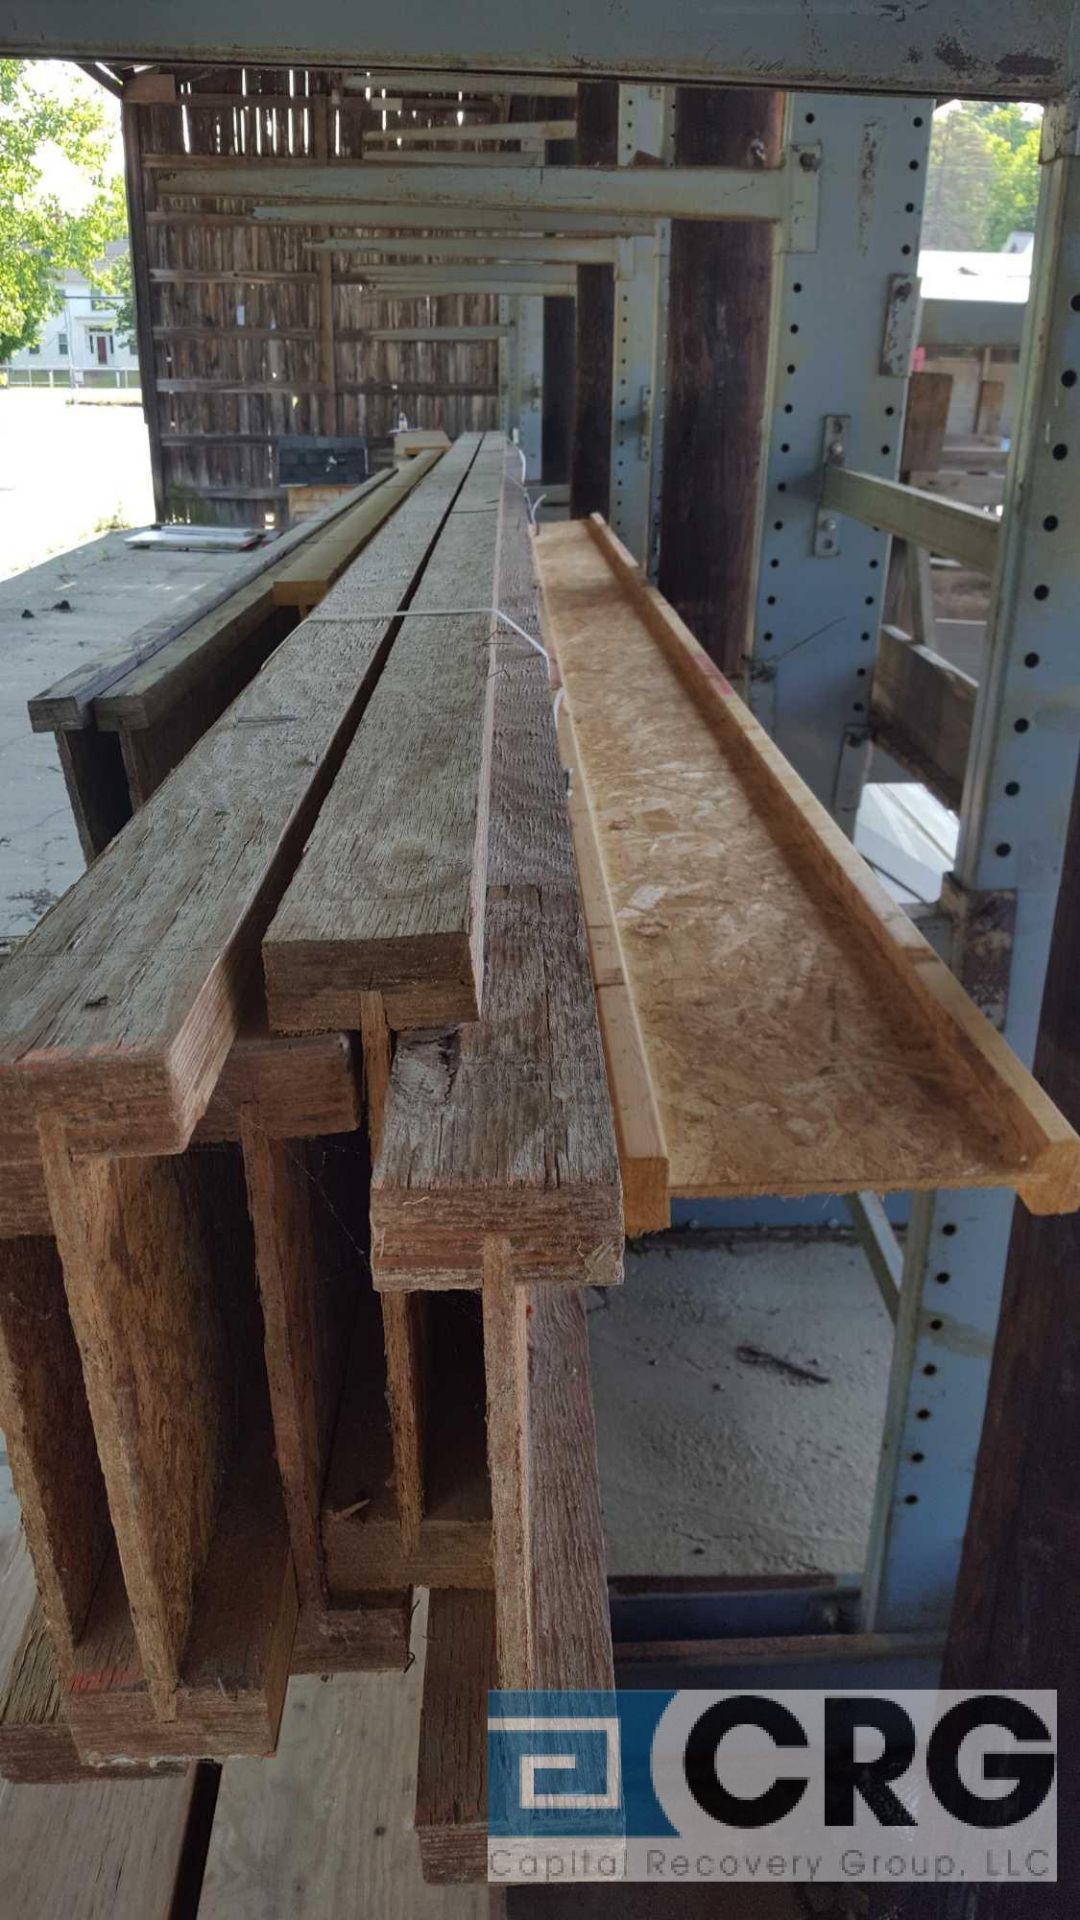 Lot of (5) assorted wood I beams, (1) 3 1/2 in. x 14 in. x 14 ft., (4) 3 1/2 in. x 14 in. x 22 ft. - Image 3 of 3